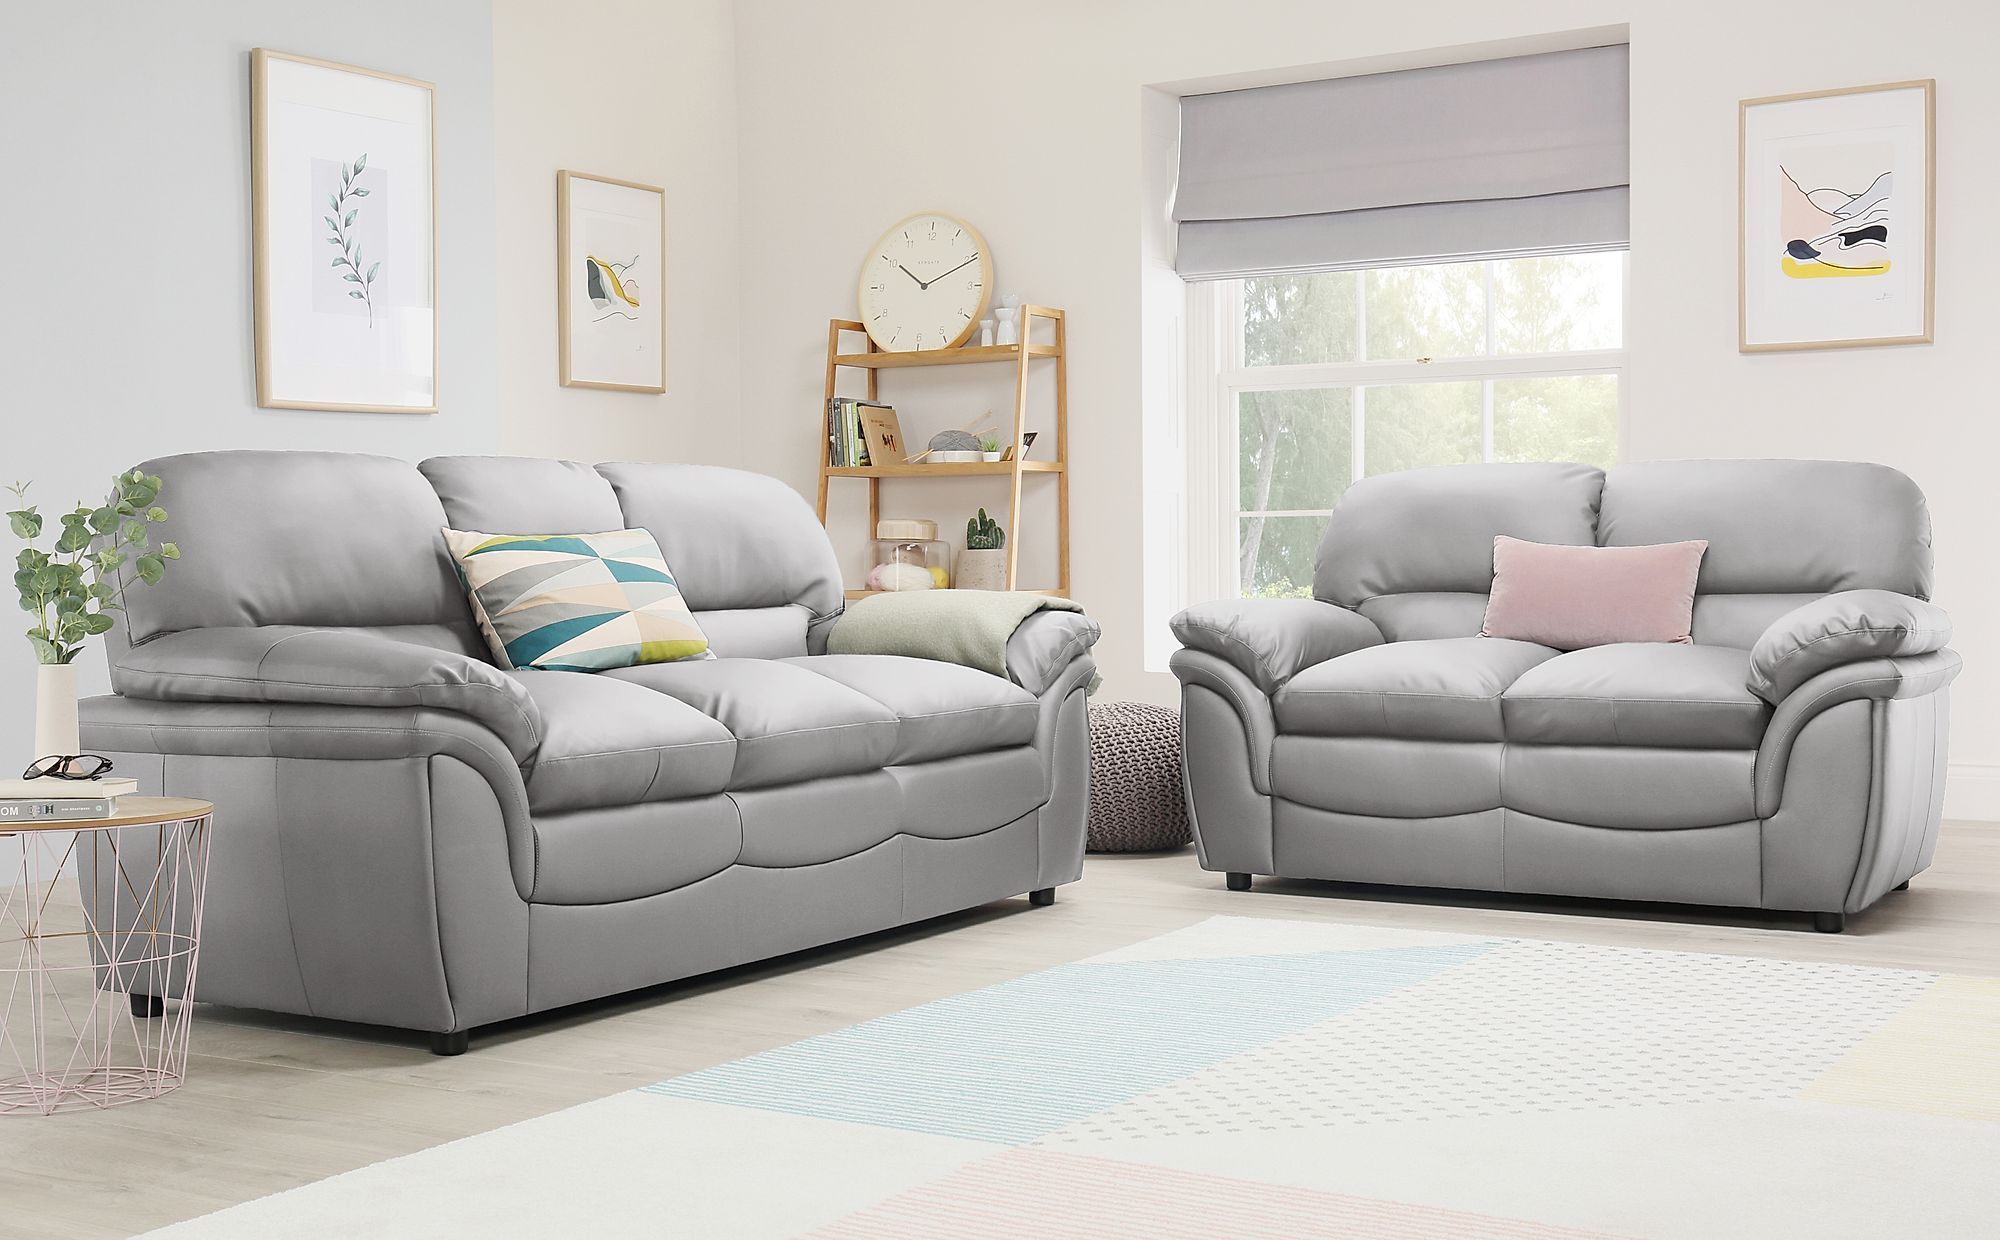 Rochester Light Grey Leather 3+2 Seater Sofa Set | Furniture Choice Regarding Sofas In Light Grey (Gallery 9 of 20)